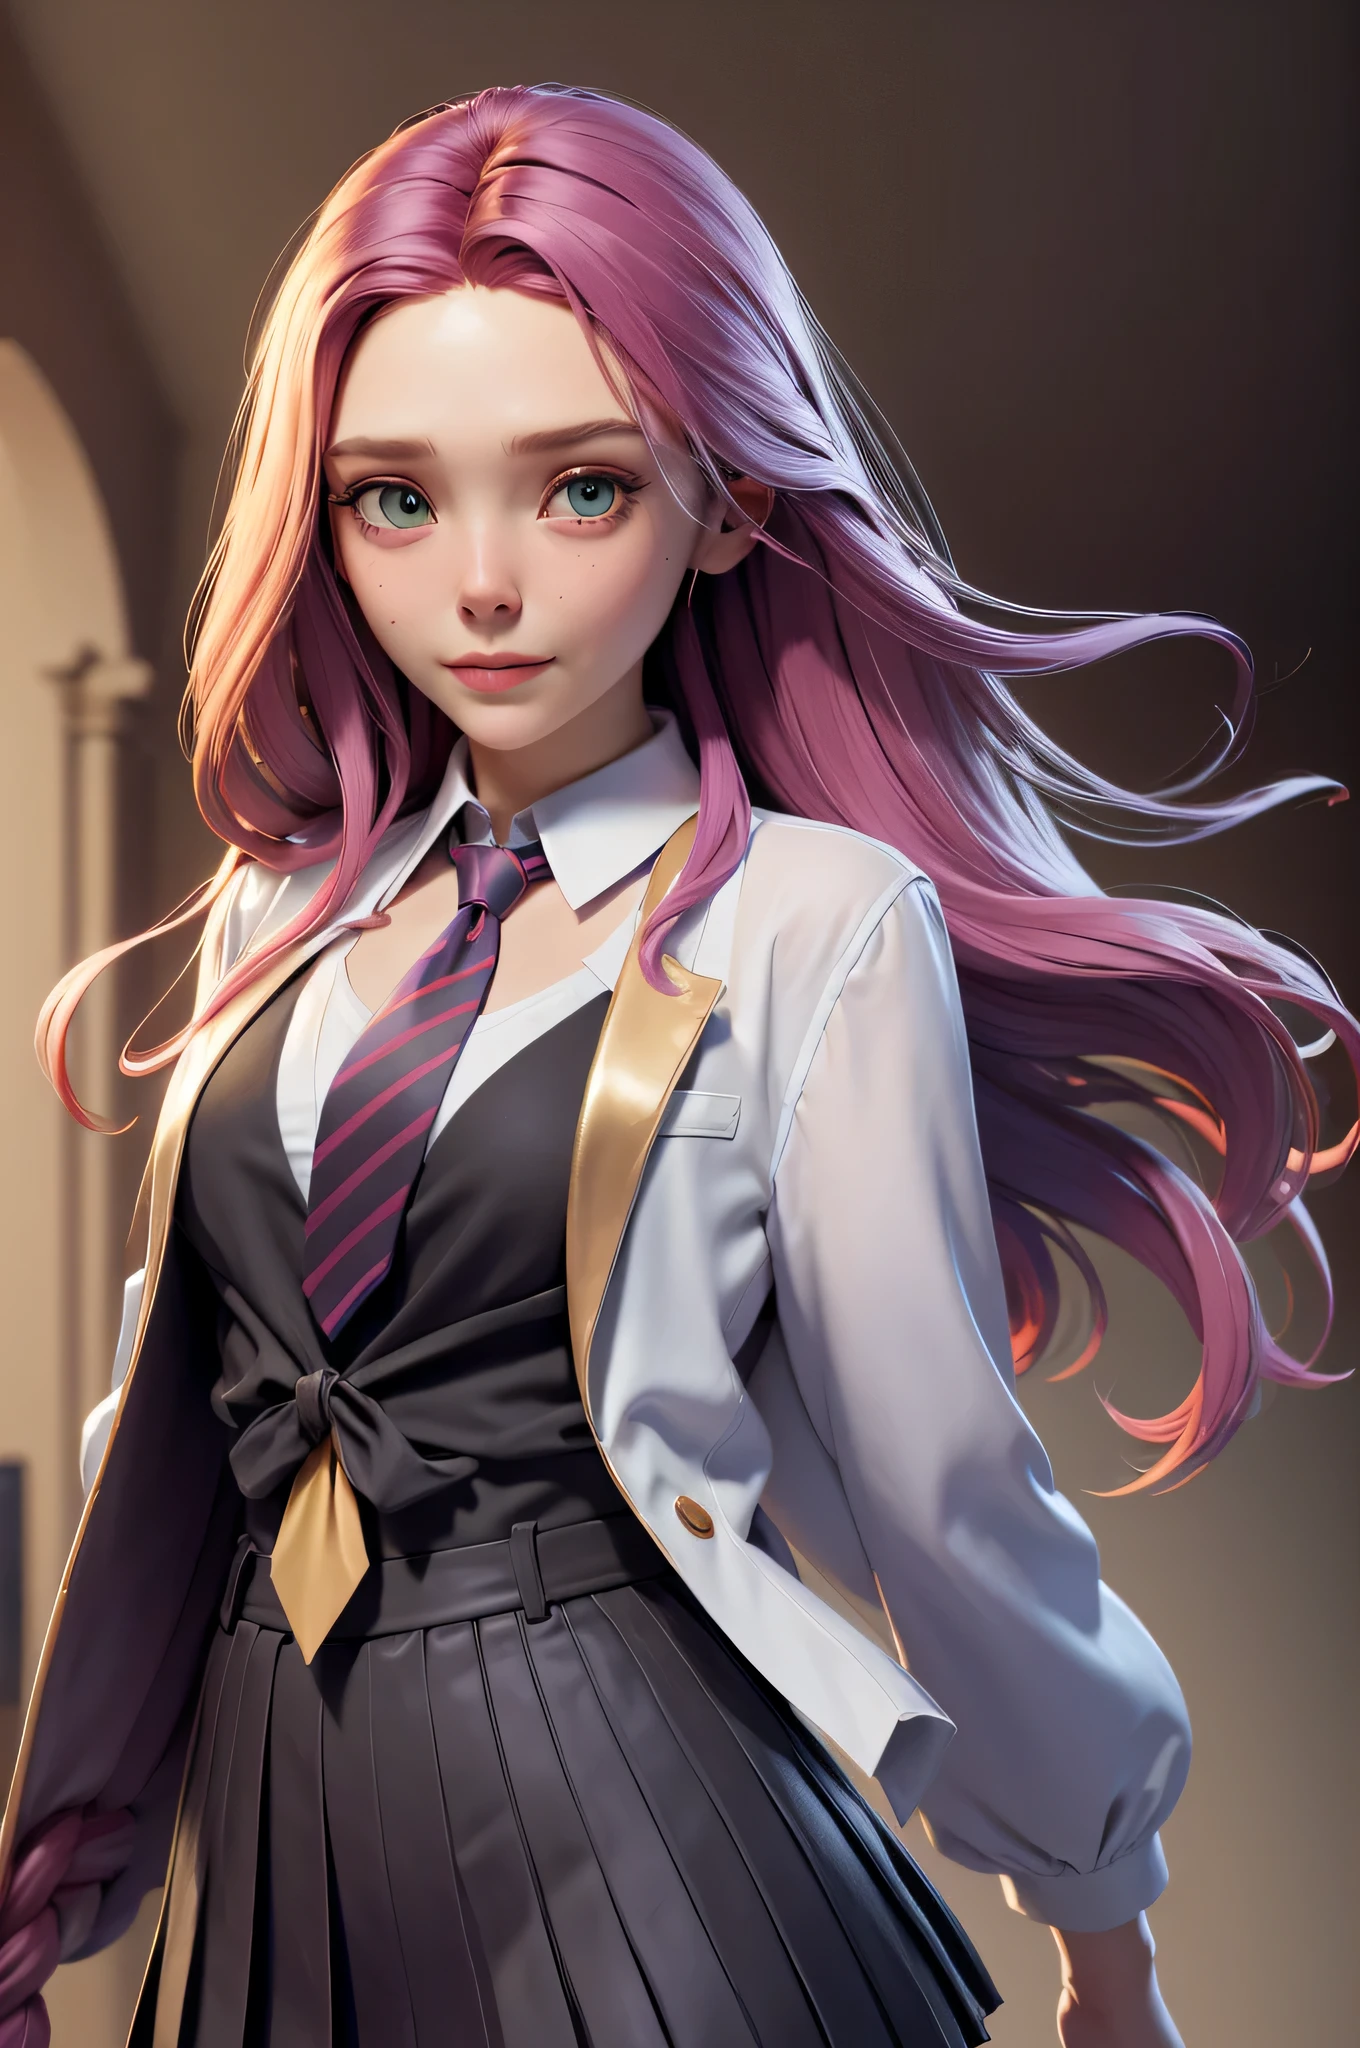 l1z0l, Elizabeth Olsen, 16 years, gynoid physics, (One:1.1), Elizabeth Olsen, perfect face, (((night skirt suit))), (((pleated school miniskirt))), (((night color jacket))), (((Silk tie))), Windsor tie, (((White shirt))), cup size four, (((Night color miniskirt with 1 horizontal gold stripe))), One focus, fully dressed, elegantly dressed, smiling, careless styling, shoulder length hair, 1 full braid, Red hair, Green eyes, beautiful detailed eyes，bright students，（very good and beautiful），（Beautiful and detailed description of the eyes), [[gentle fingers and hands:0.55]::0.85], (detail fingers), Facing the camera, (Background with：school corridor，mystical atmosphere), (Illustration, cartoon, Masterpiece, very detailed, Best quality，cinematic lighting，muted colors, detailed background, A high resolution)